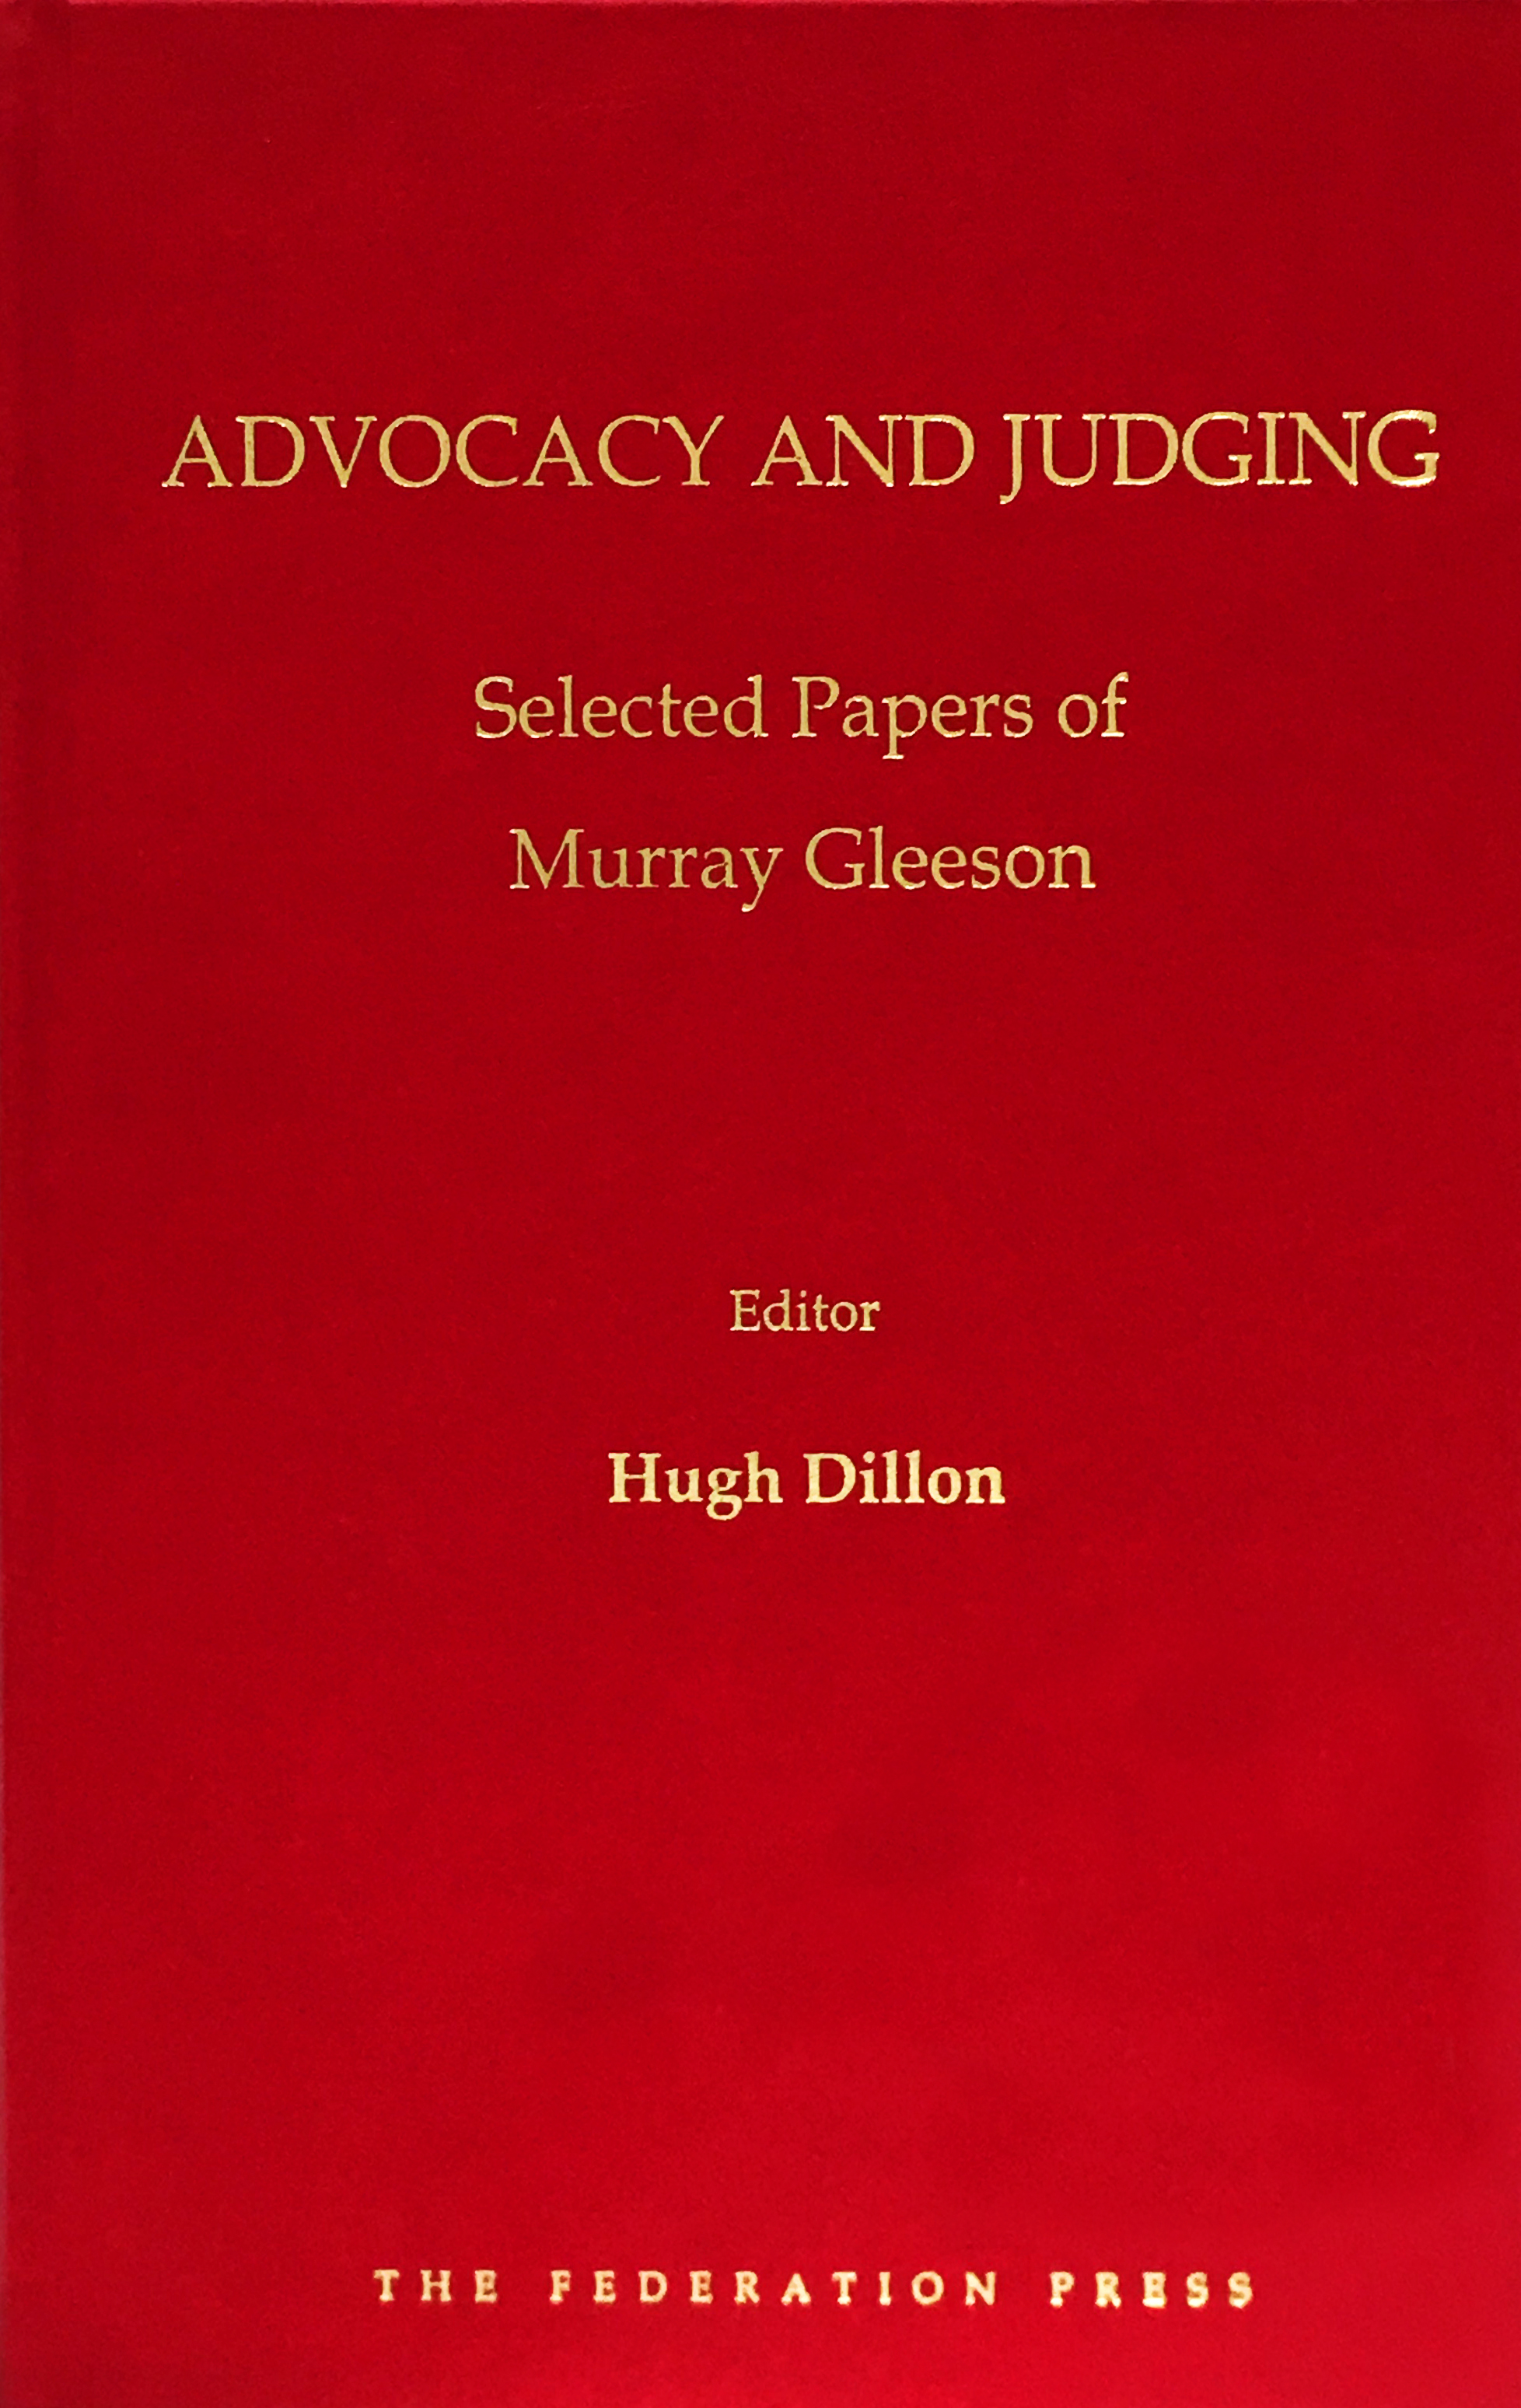 Advocacy and Judging: Selected Papers of Murray Gleeson